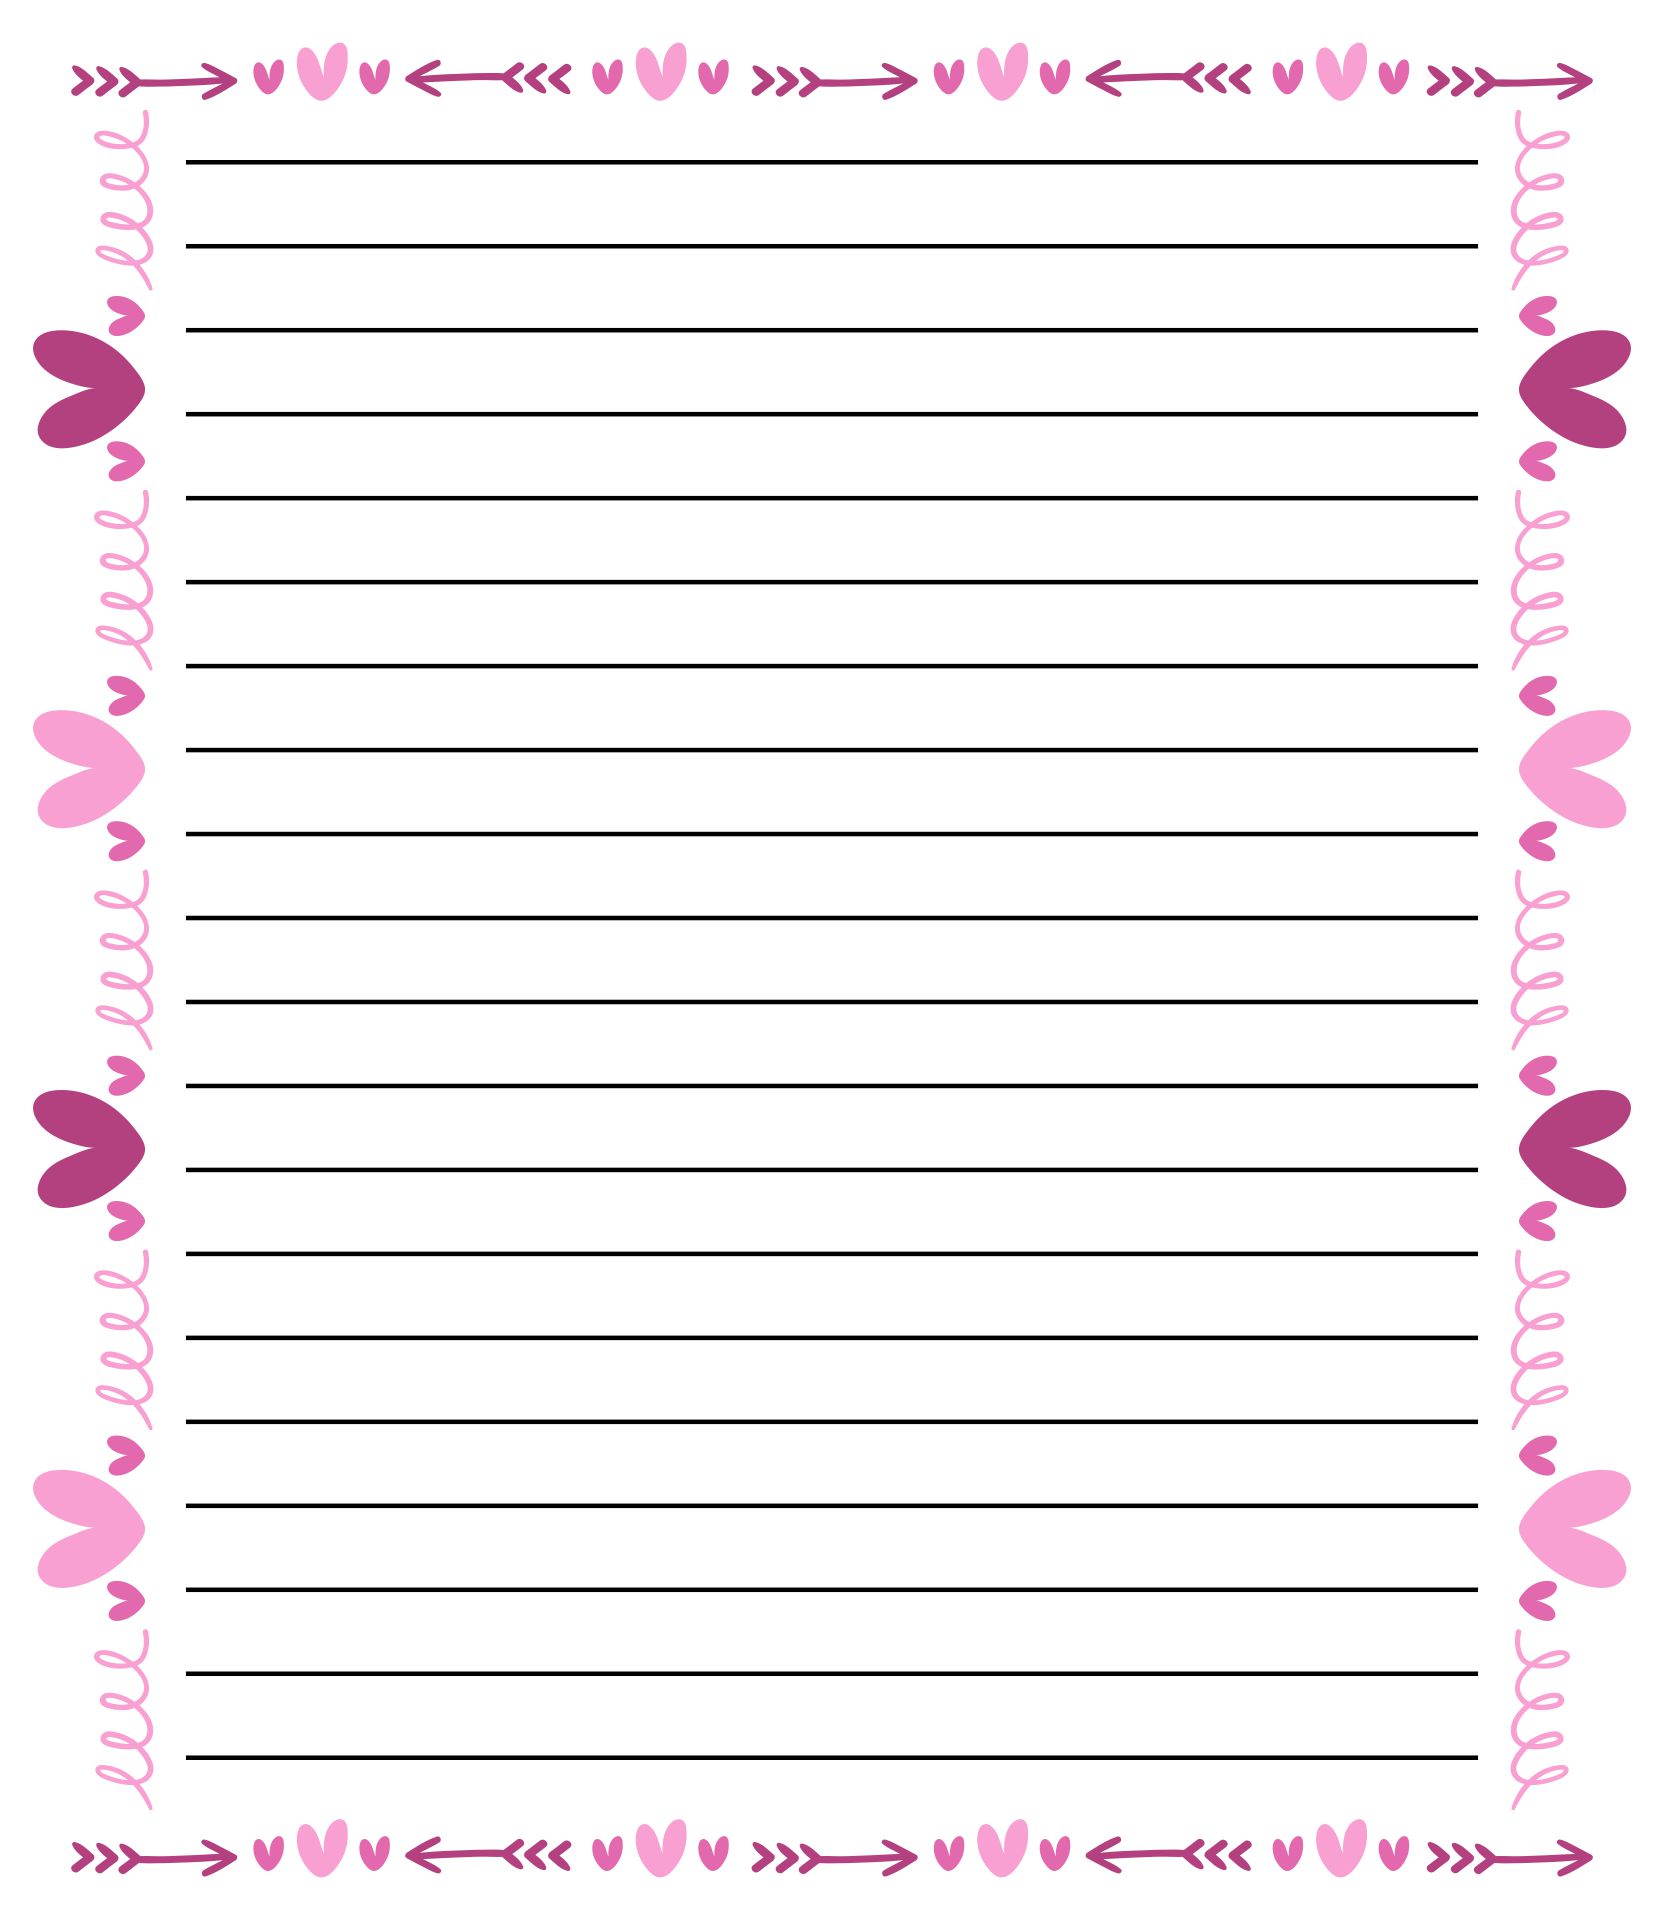 Free Lined Paper With Border Free Printable Lined Paper With Borders Printable Stationary 1